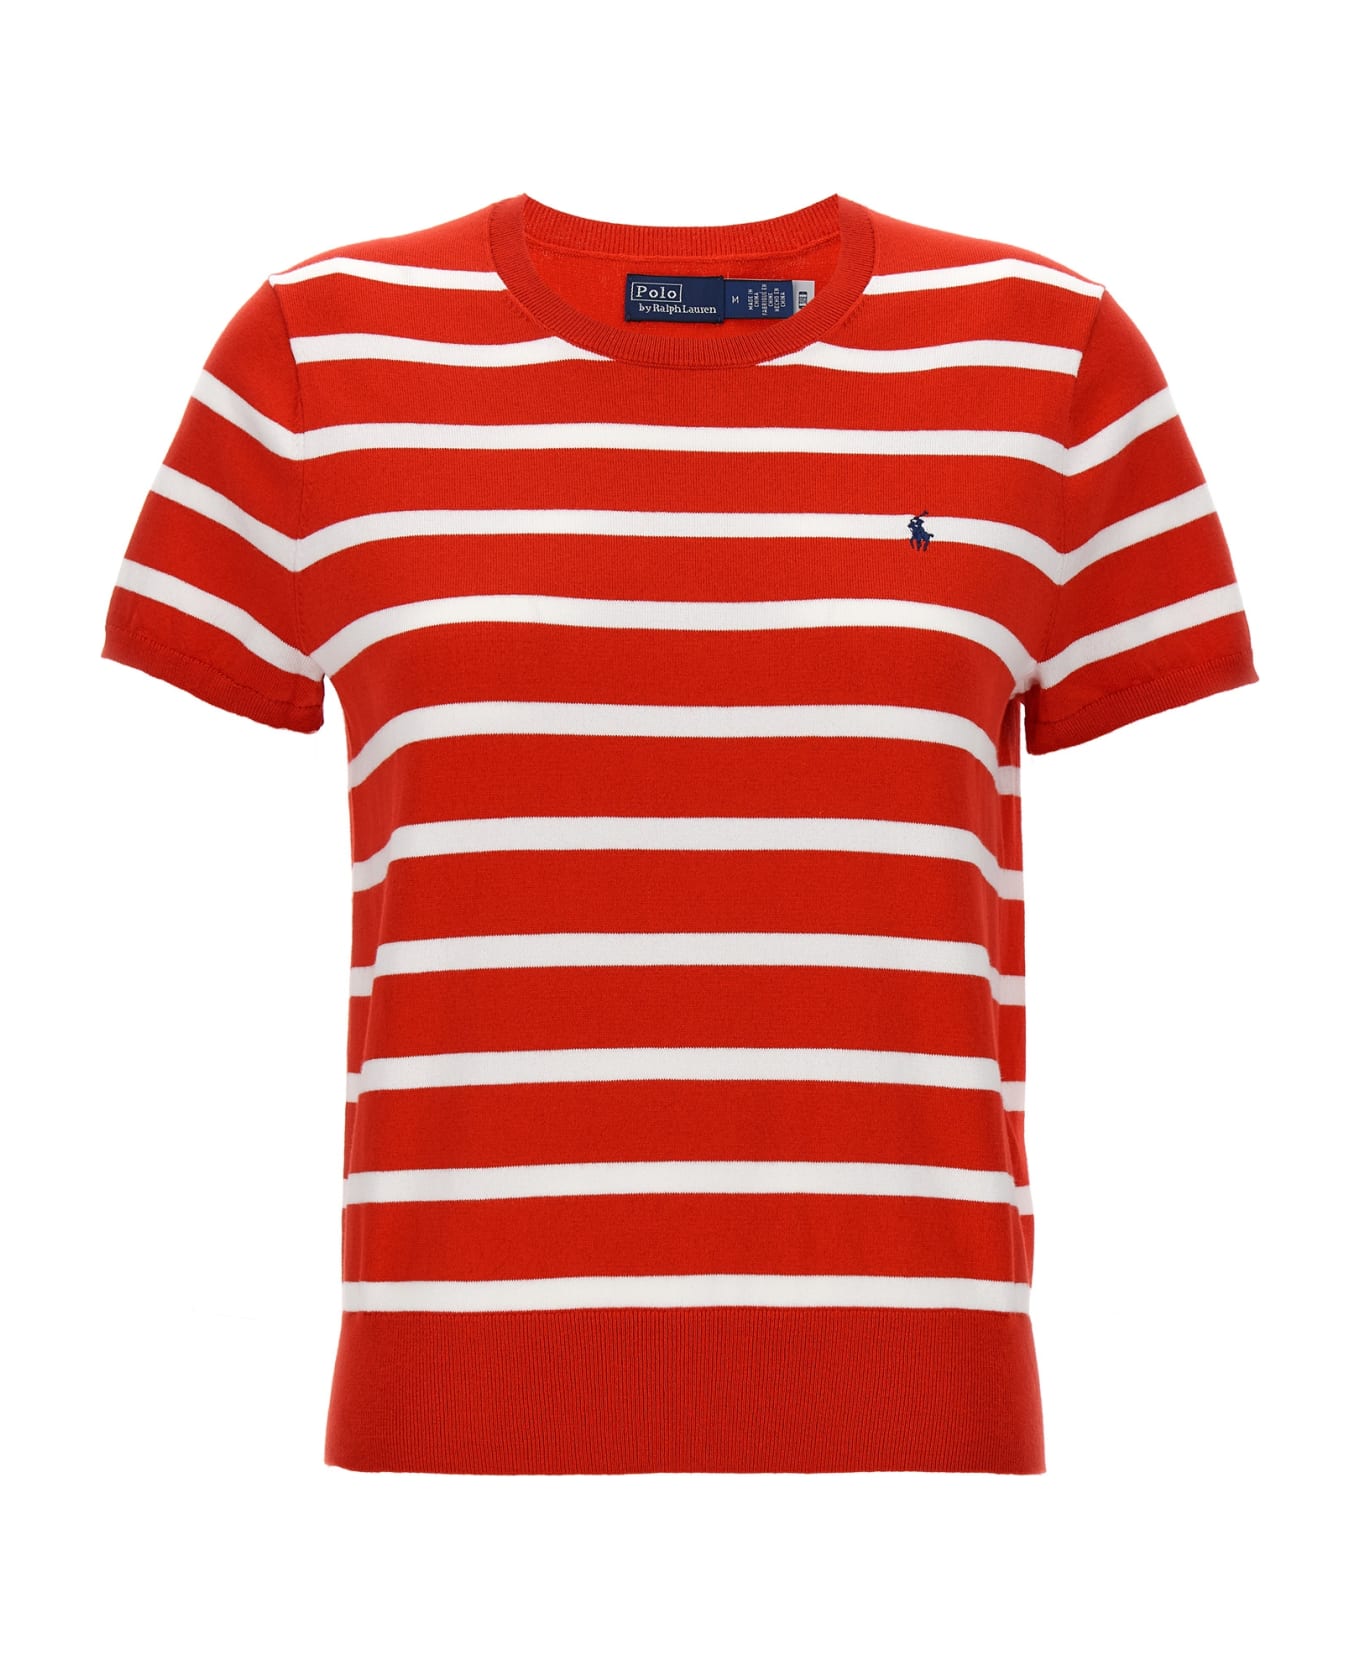 Polo Ralph Lauren Striped Sweater - Red